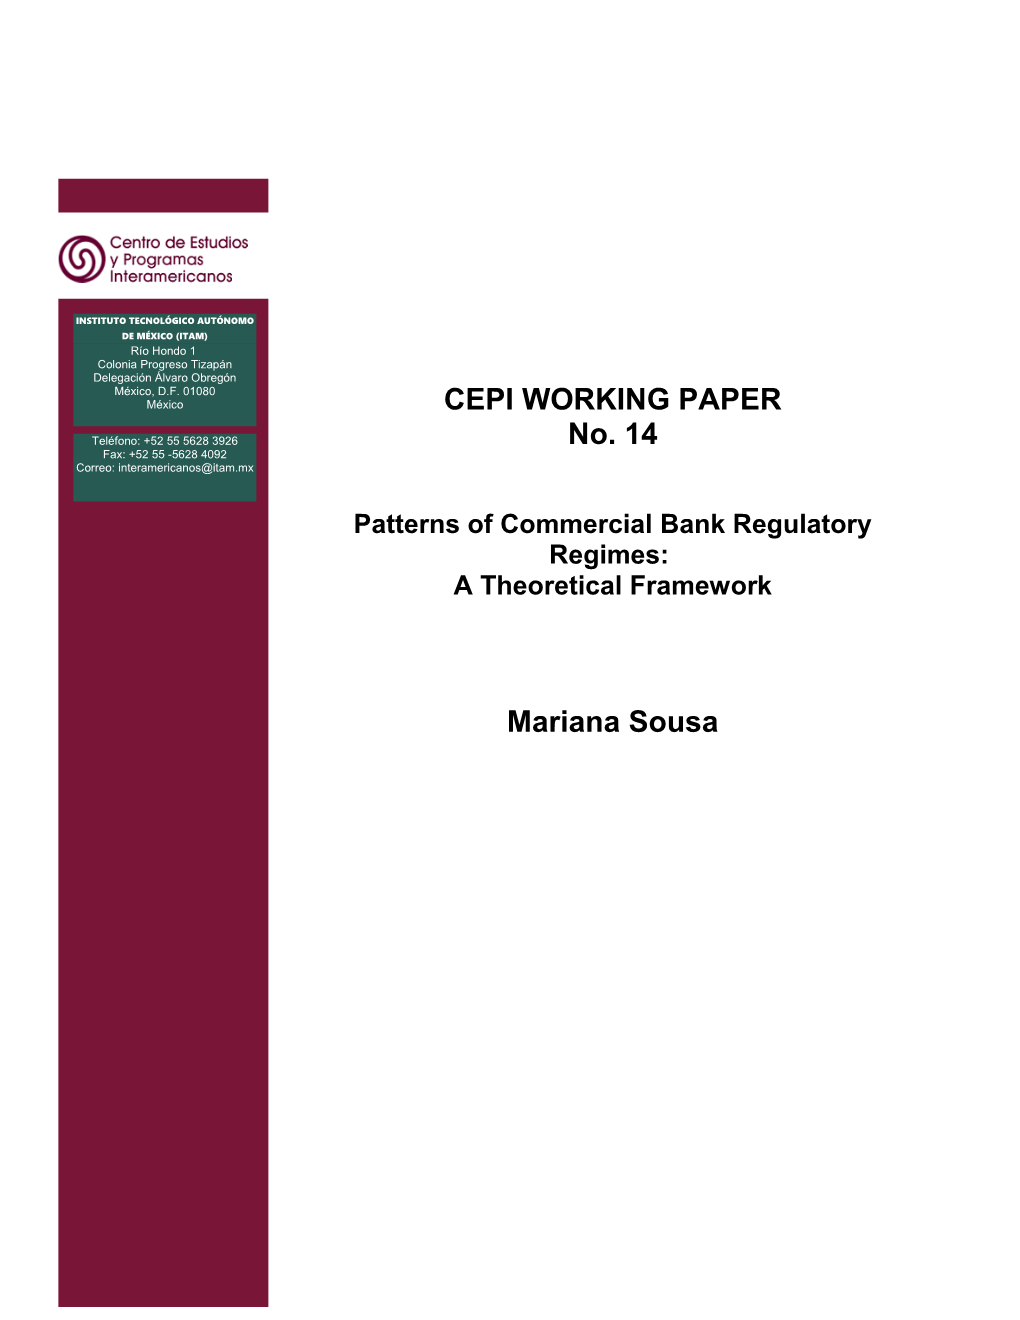 The Political Economy of Banking Regulation